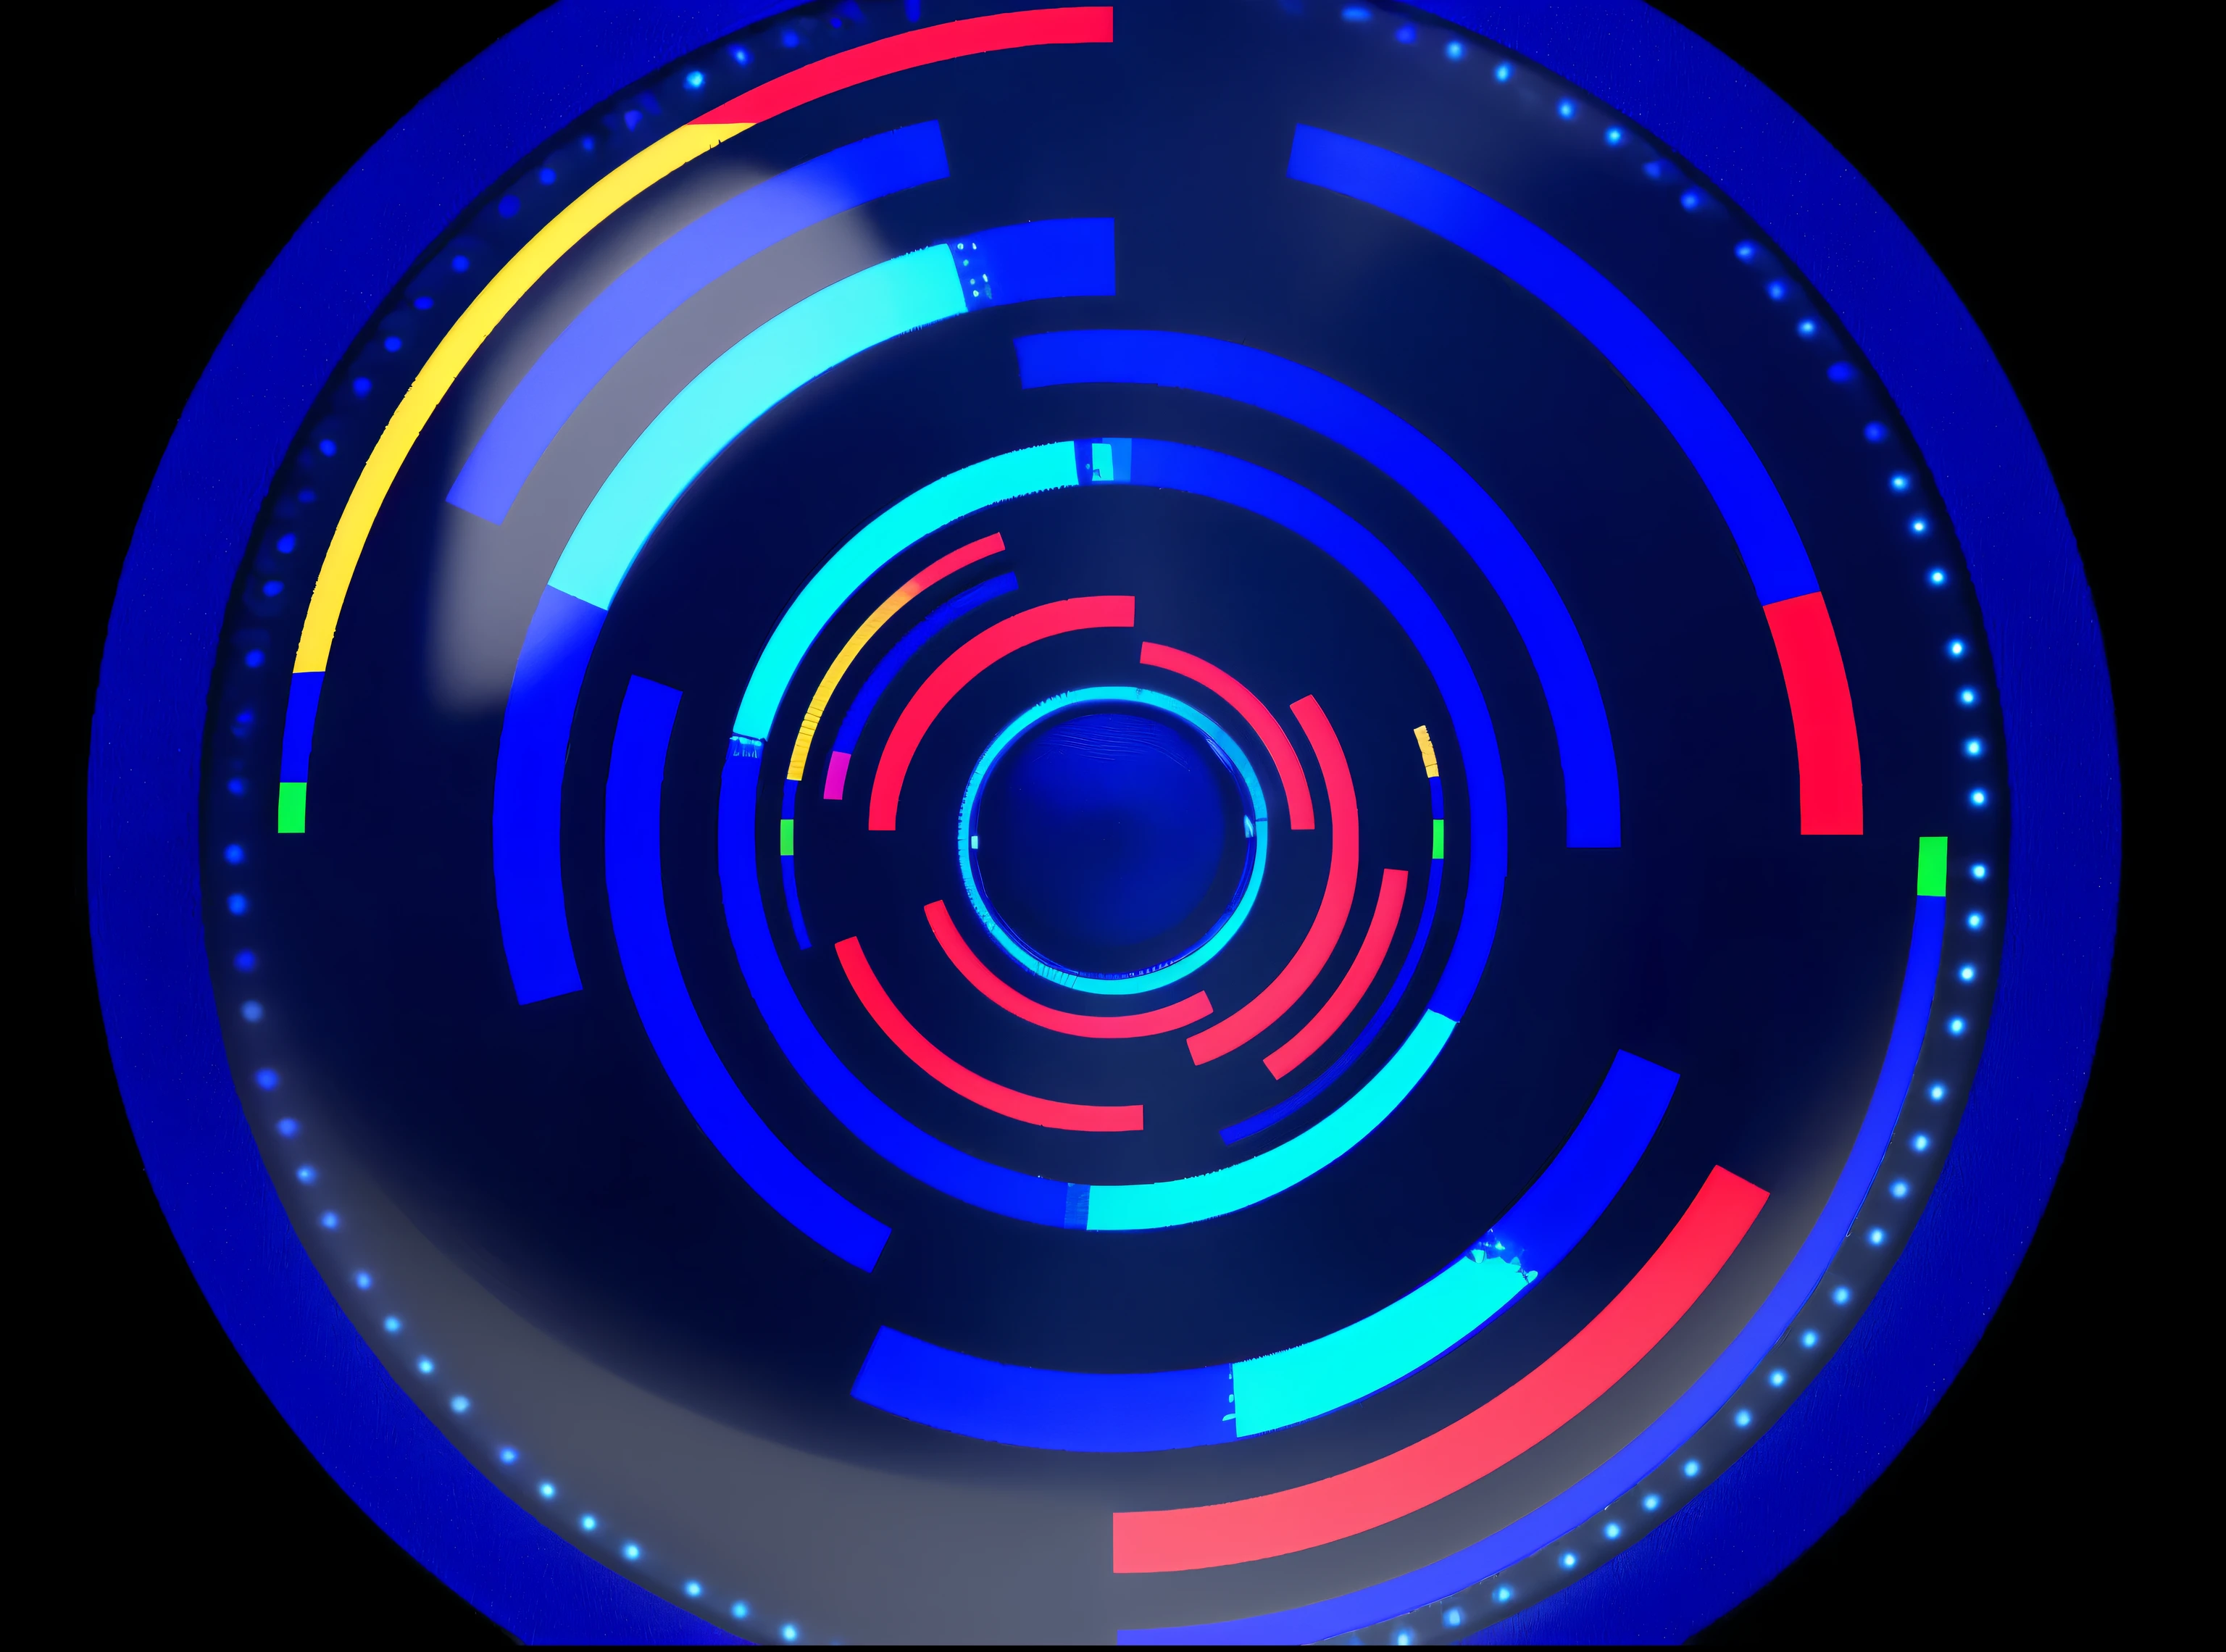 arafed circular clock with a blue background and red and blue lights, neon circles, blue circular hologram, round background, computer generated, technological rings, light looping, techno neon projector background, light circles, blue and red lights, digital illustration radiating, concentric circles, planet with rings, infinite space clock background, cycles4d render, video still